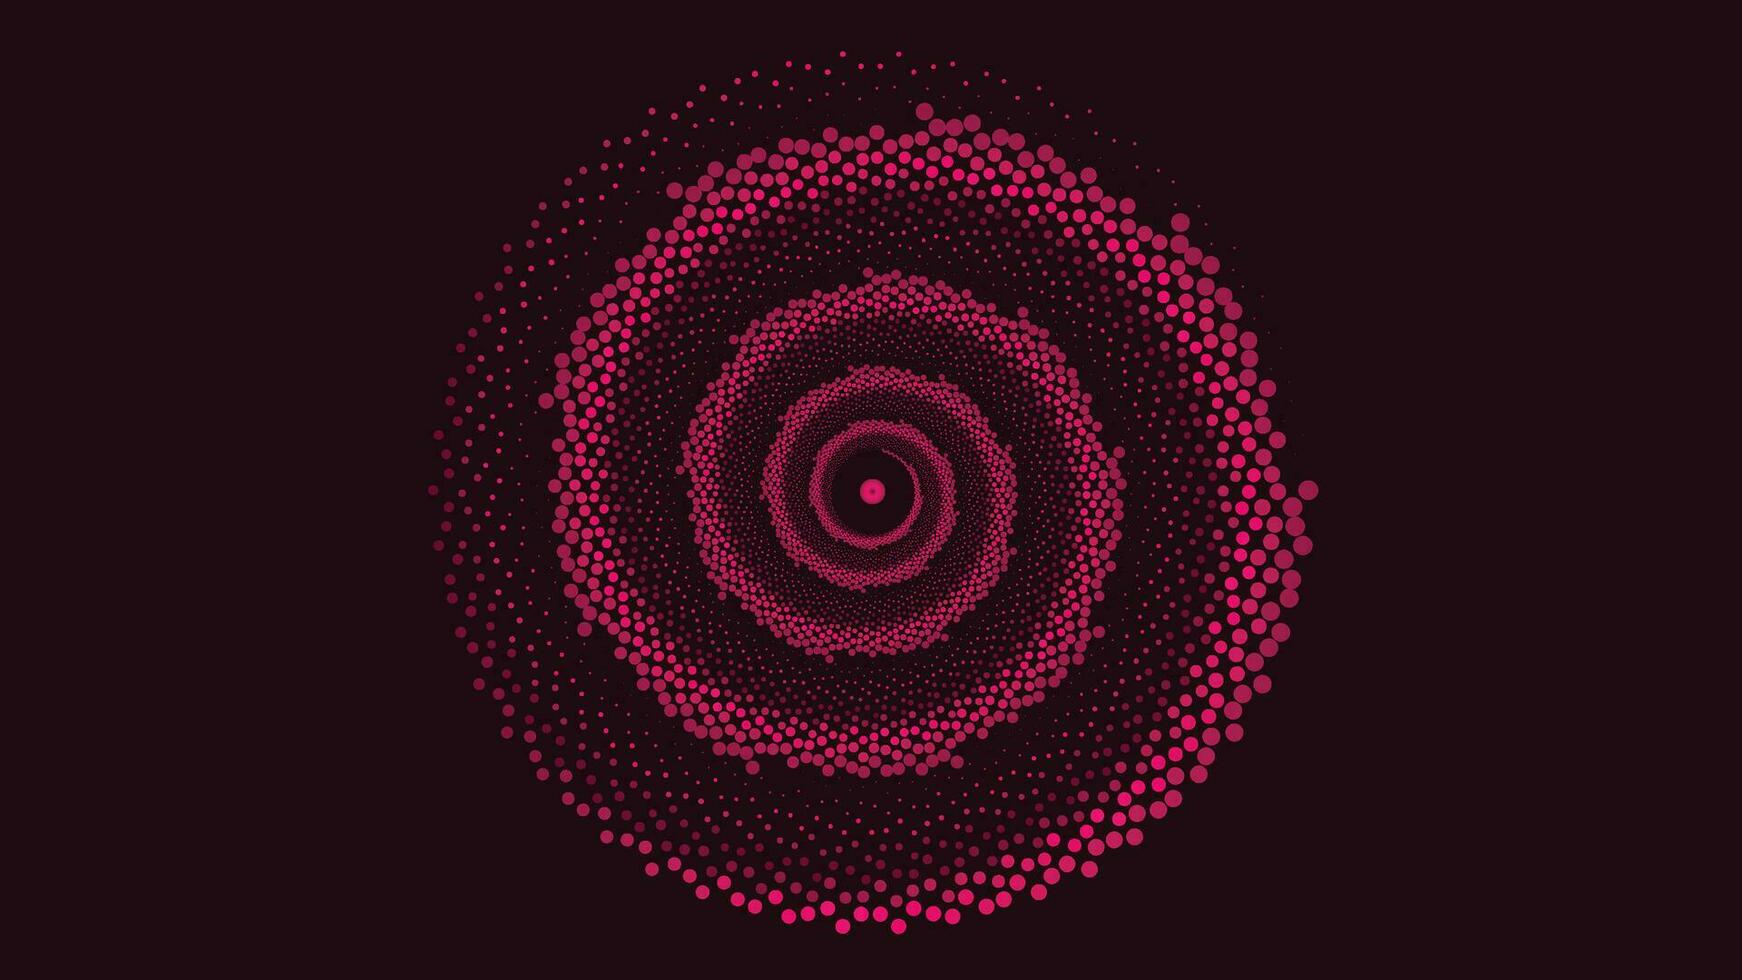 Abstract spiral vortex dotted background for your creative project. vector